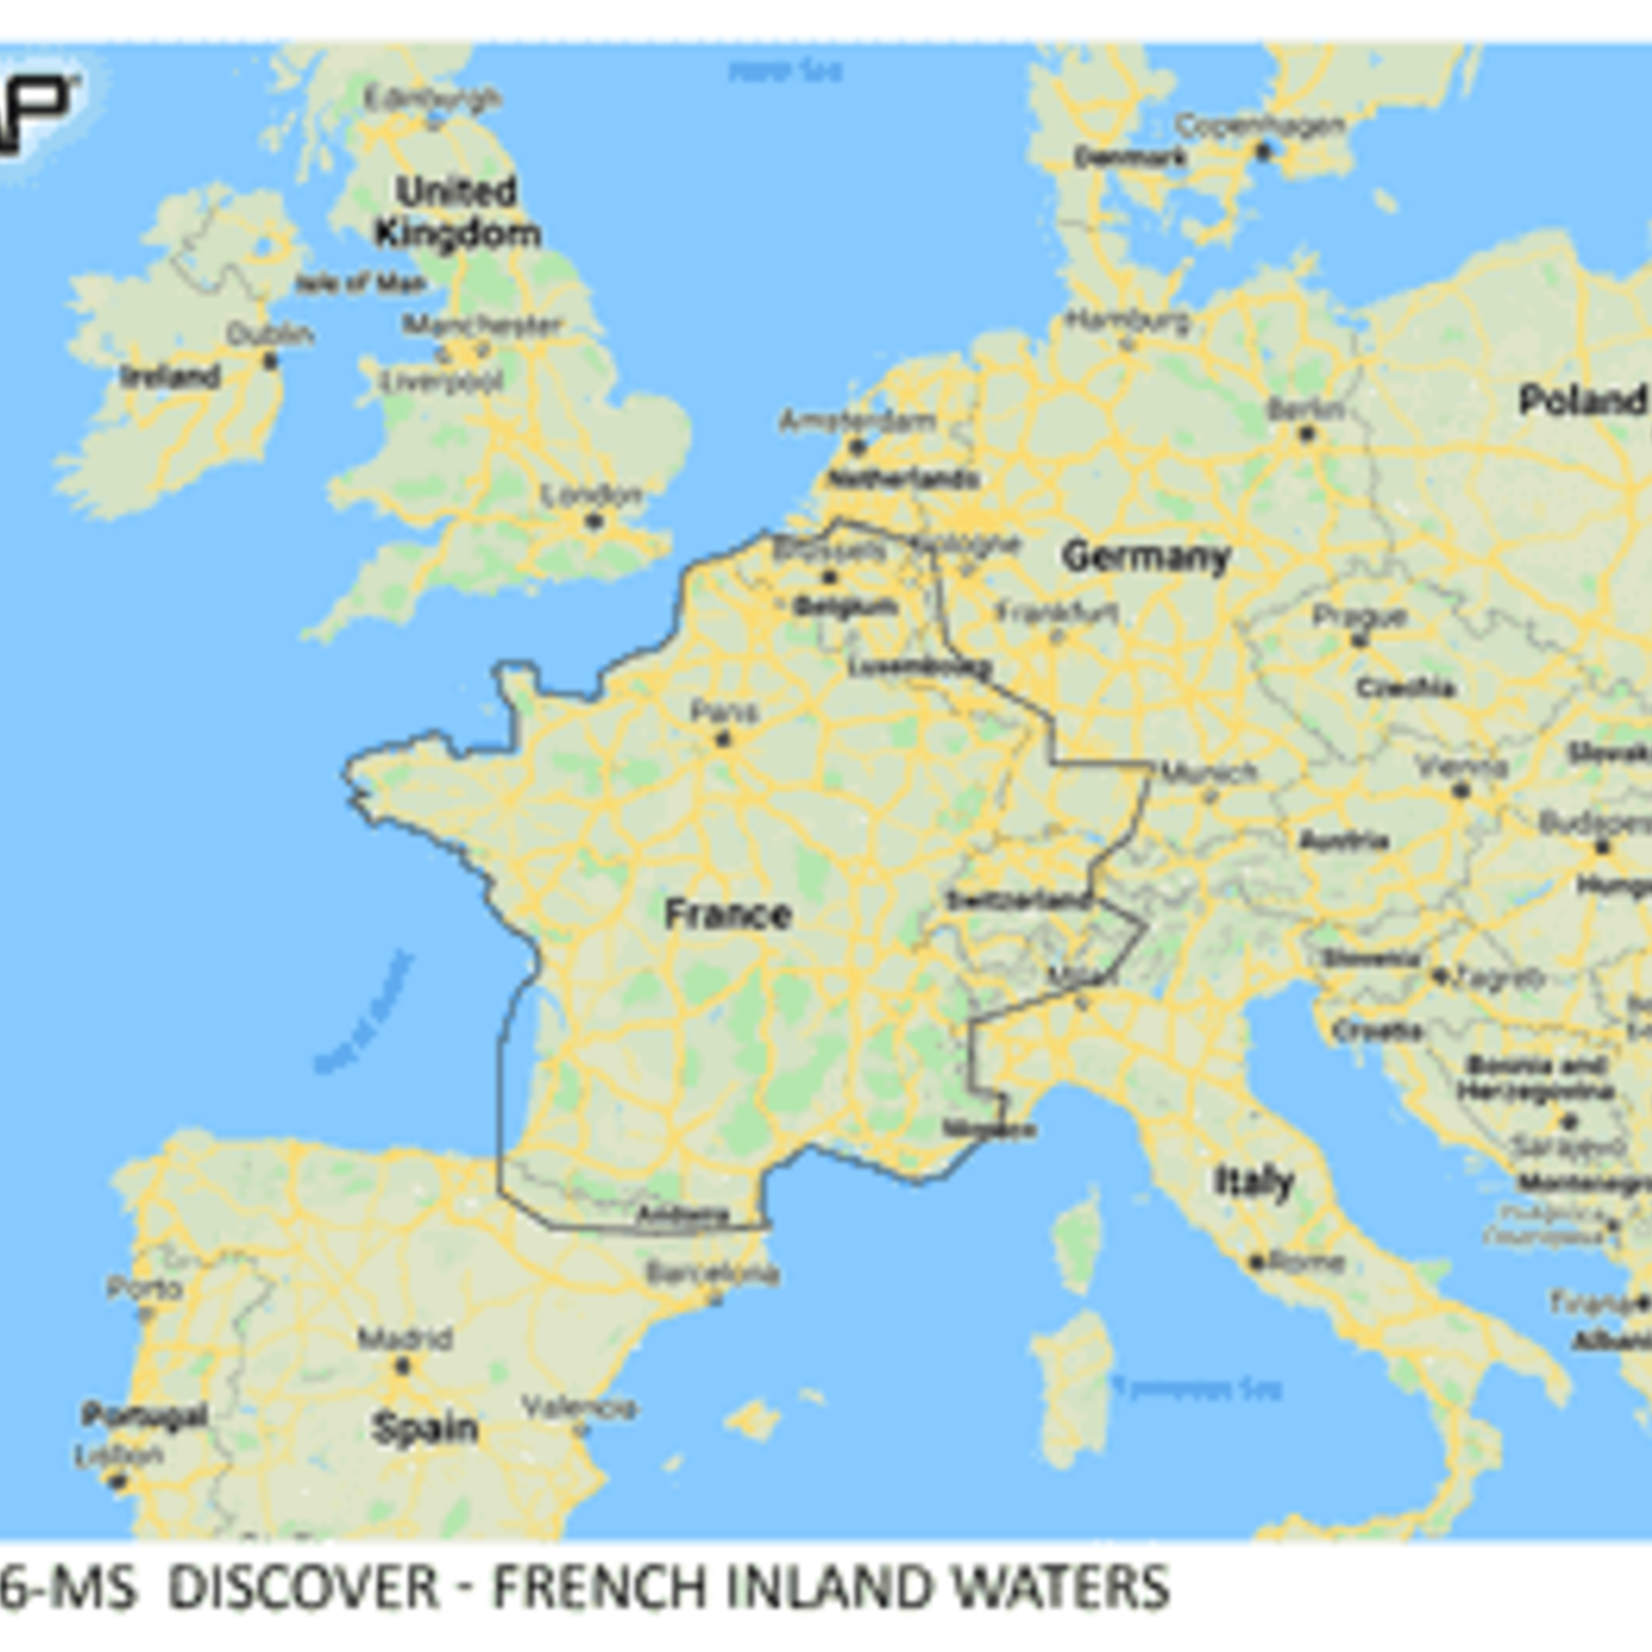 C-MAP DISCOVER - French Inland Waters